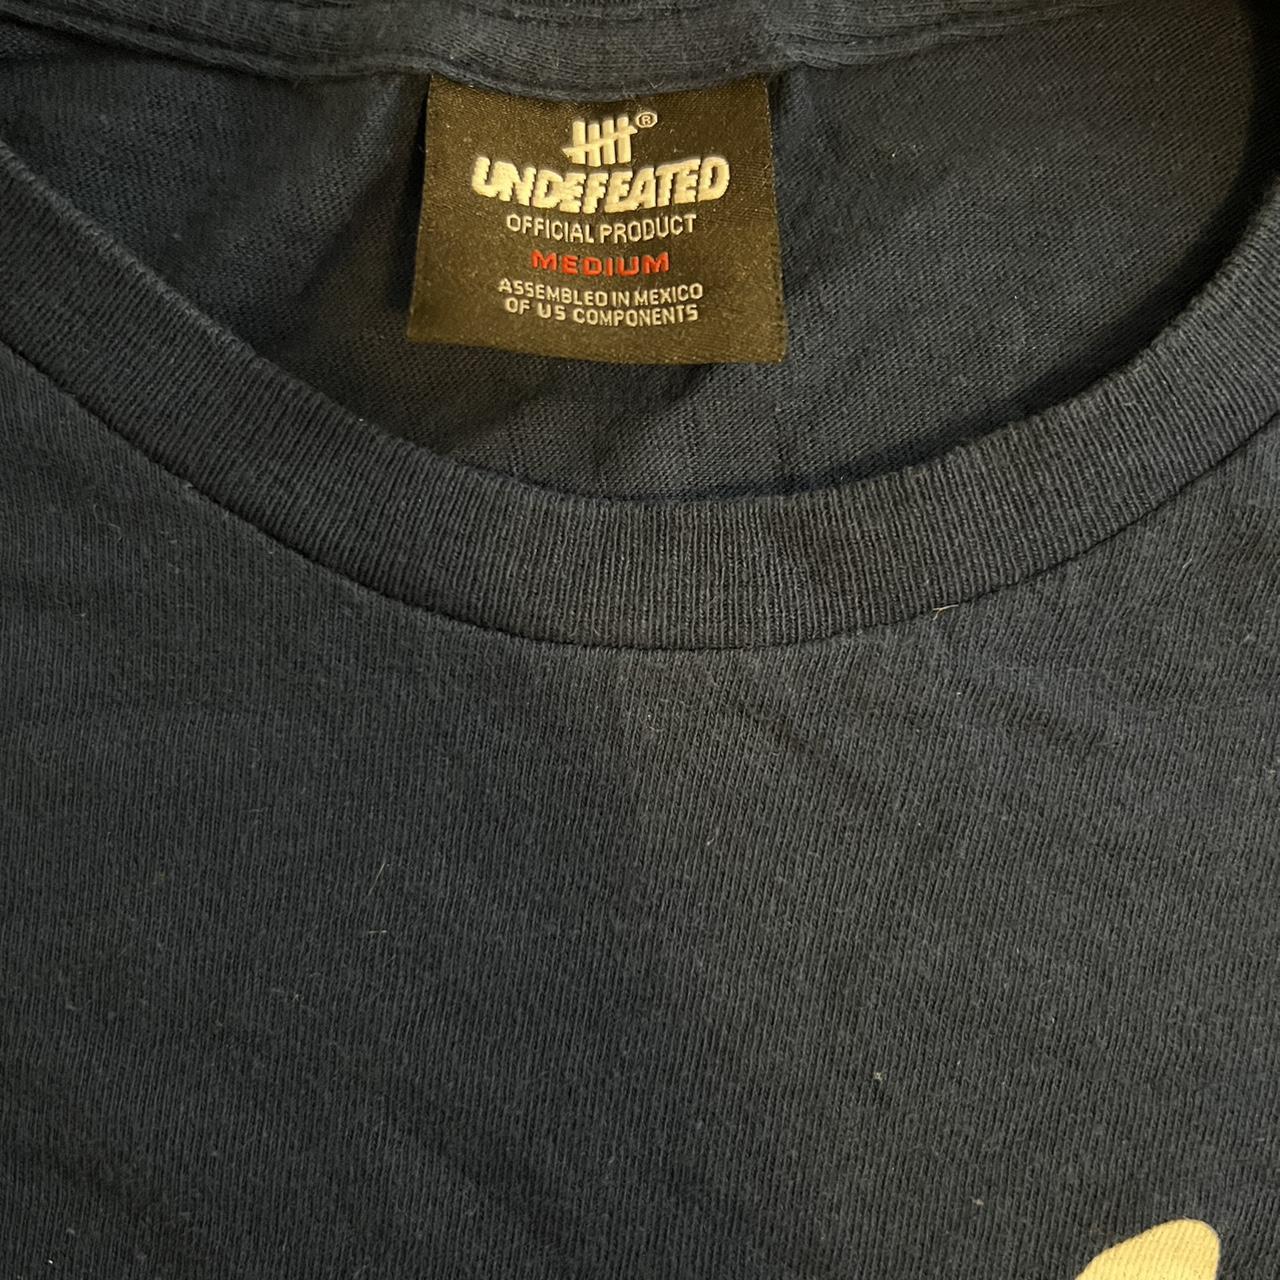 Undefeated Men's Navy and White T-shirt (4)